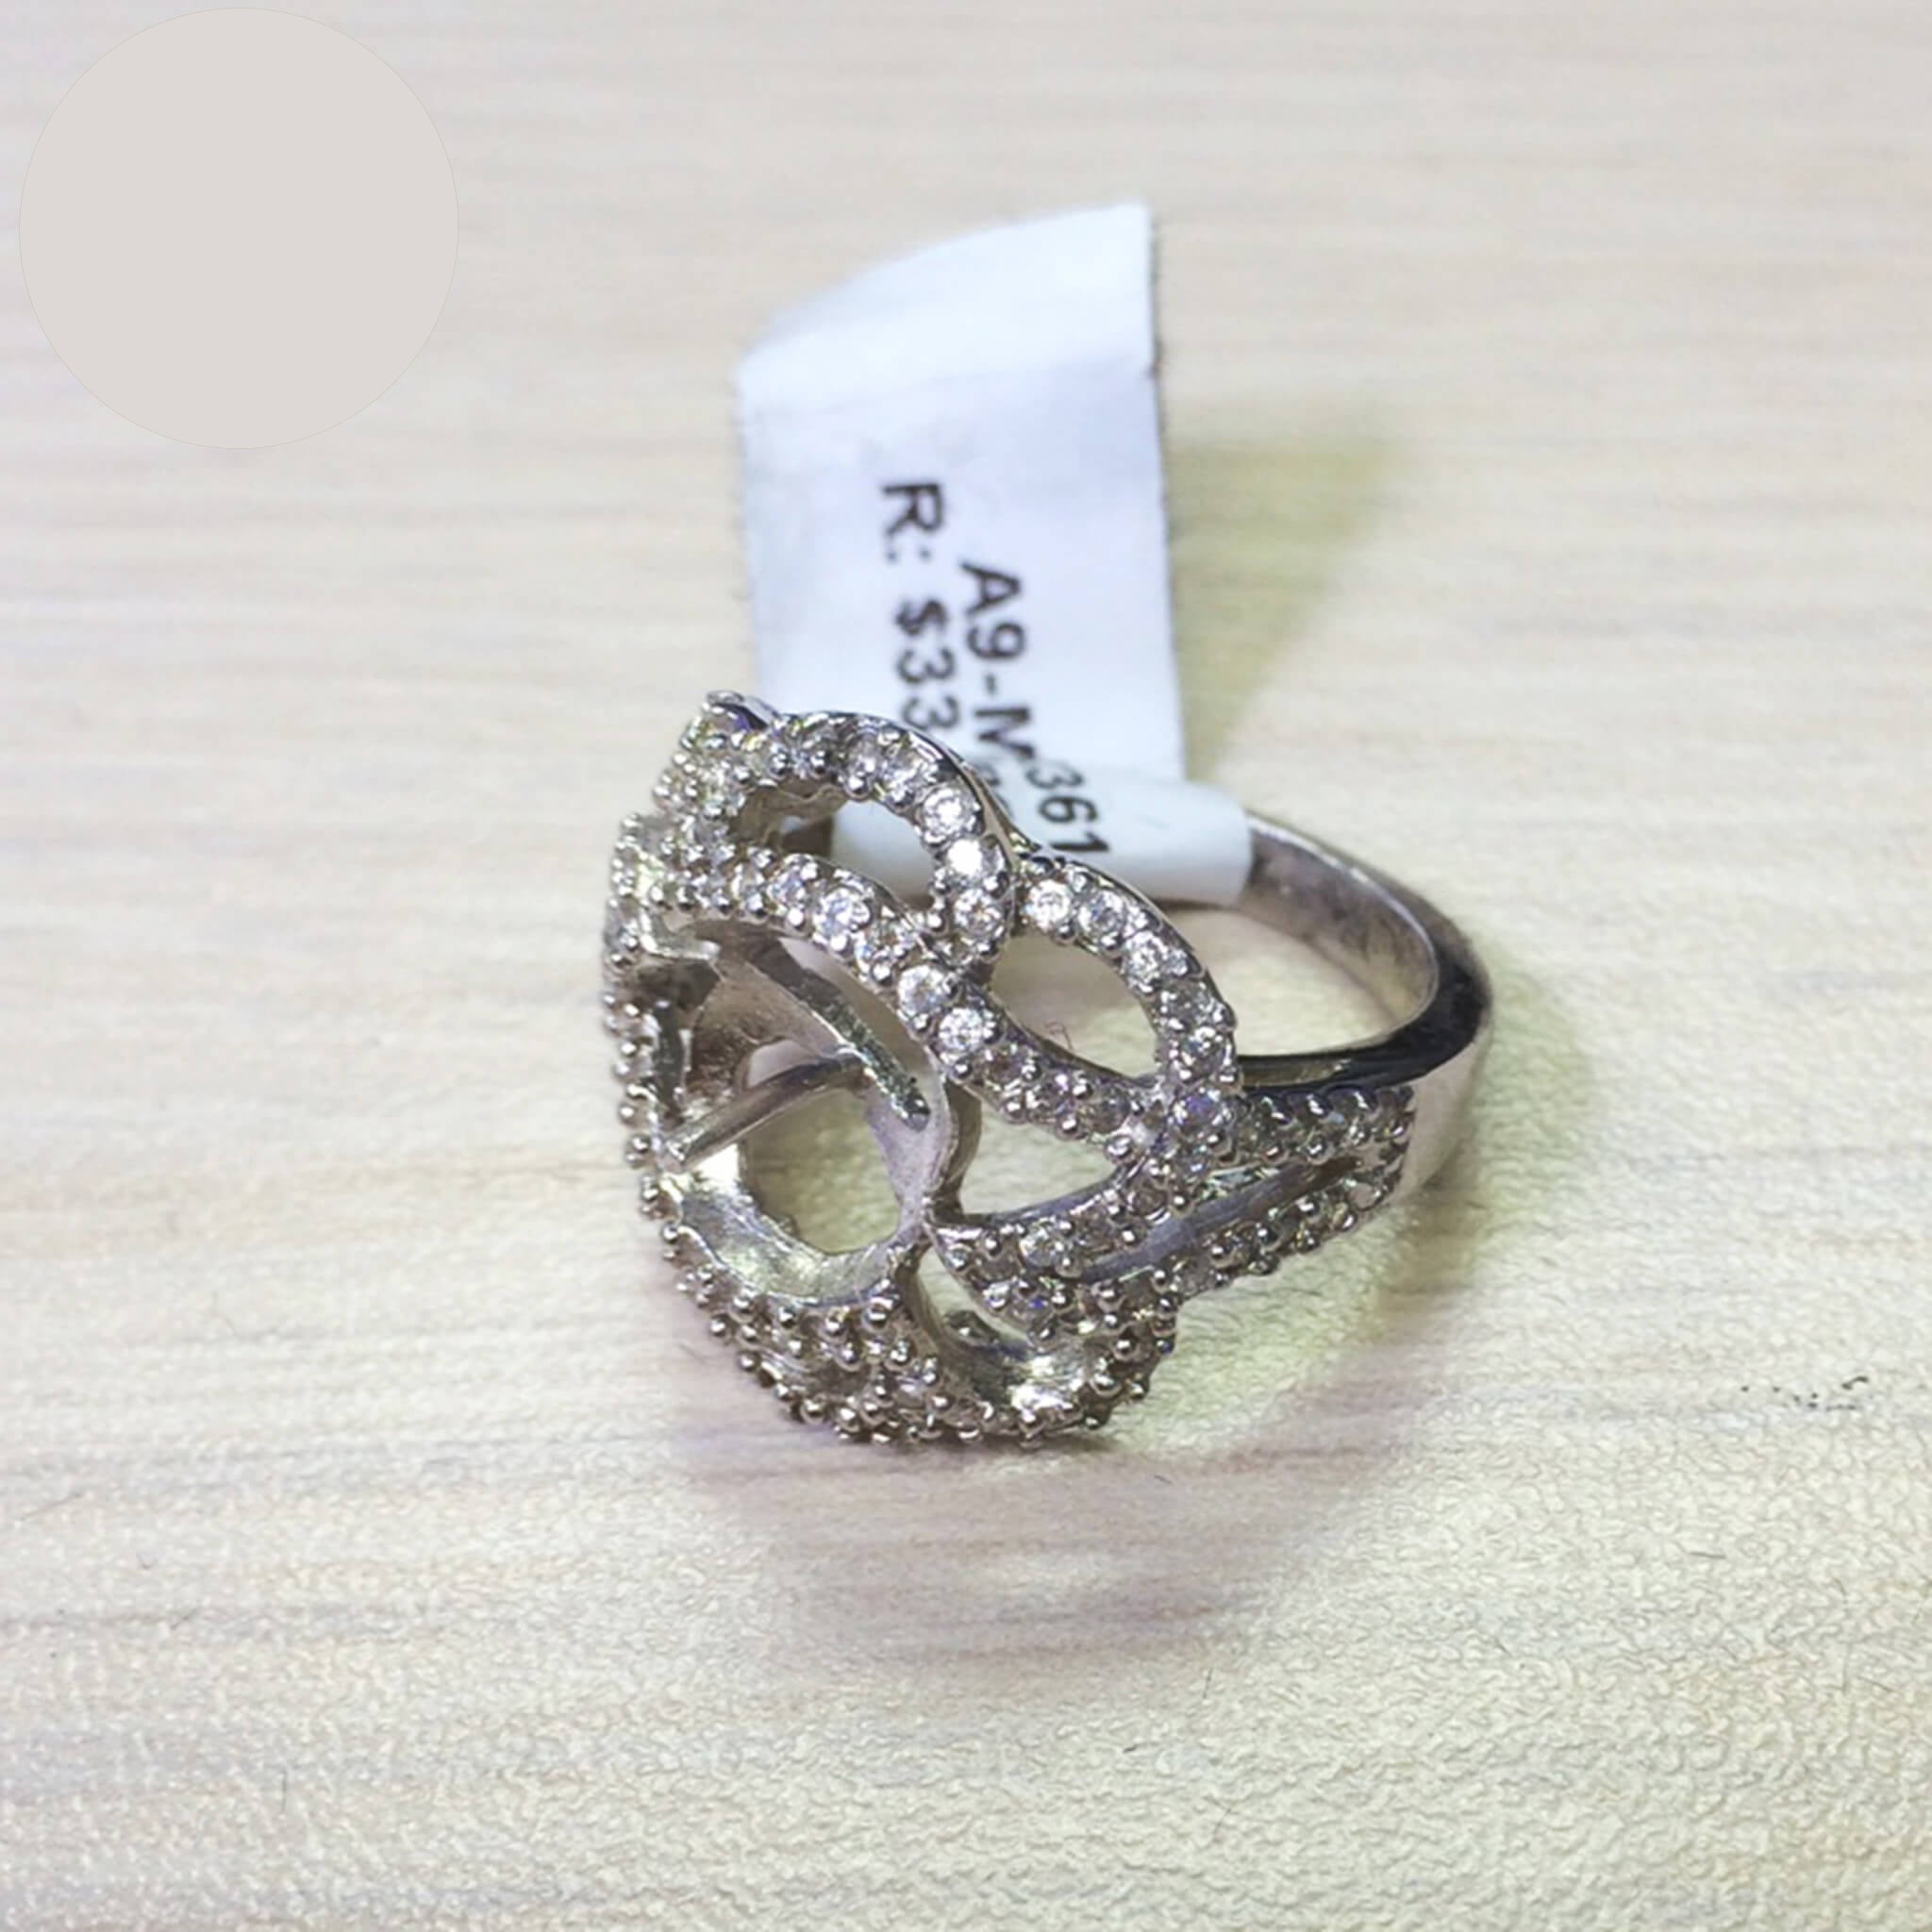 Unique Floral Ring with Cubic Zirconia Inlays and Cup and Peg Mounting in Sterling Silver 9mm